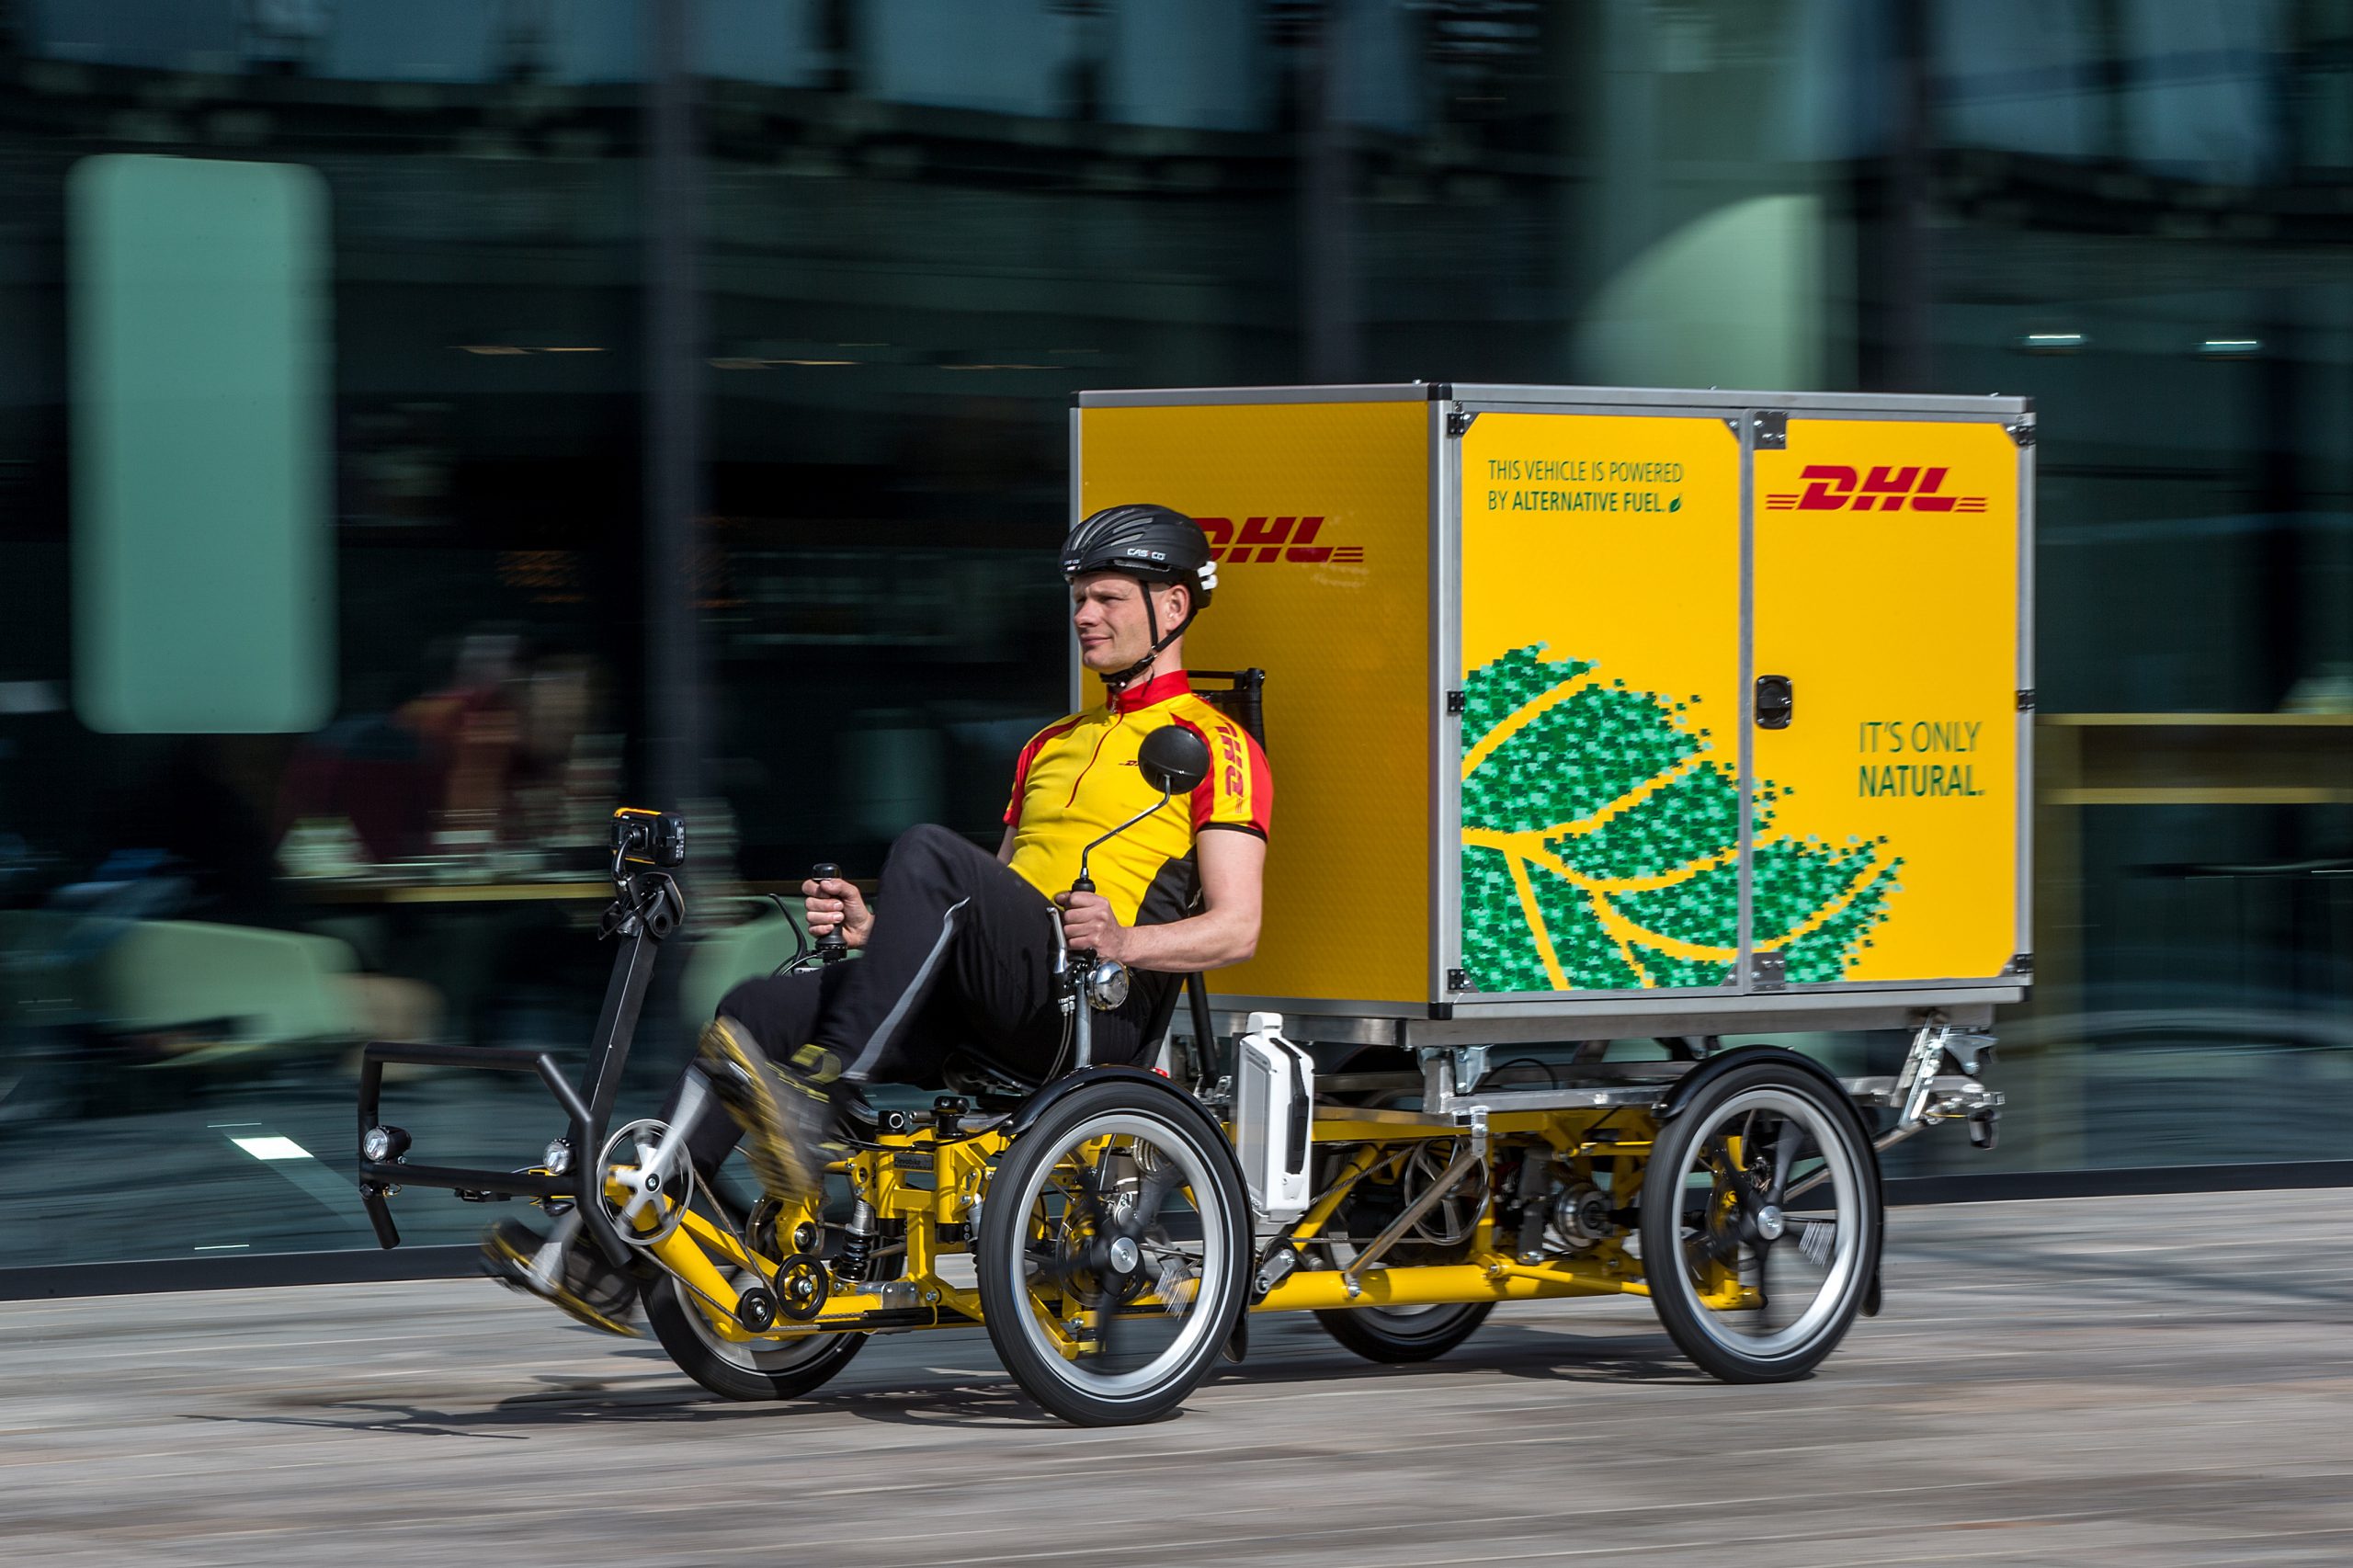 DHL’s Cubicycle takes to the streets of Almere